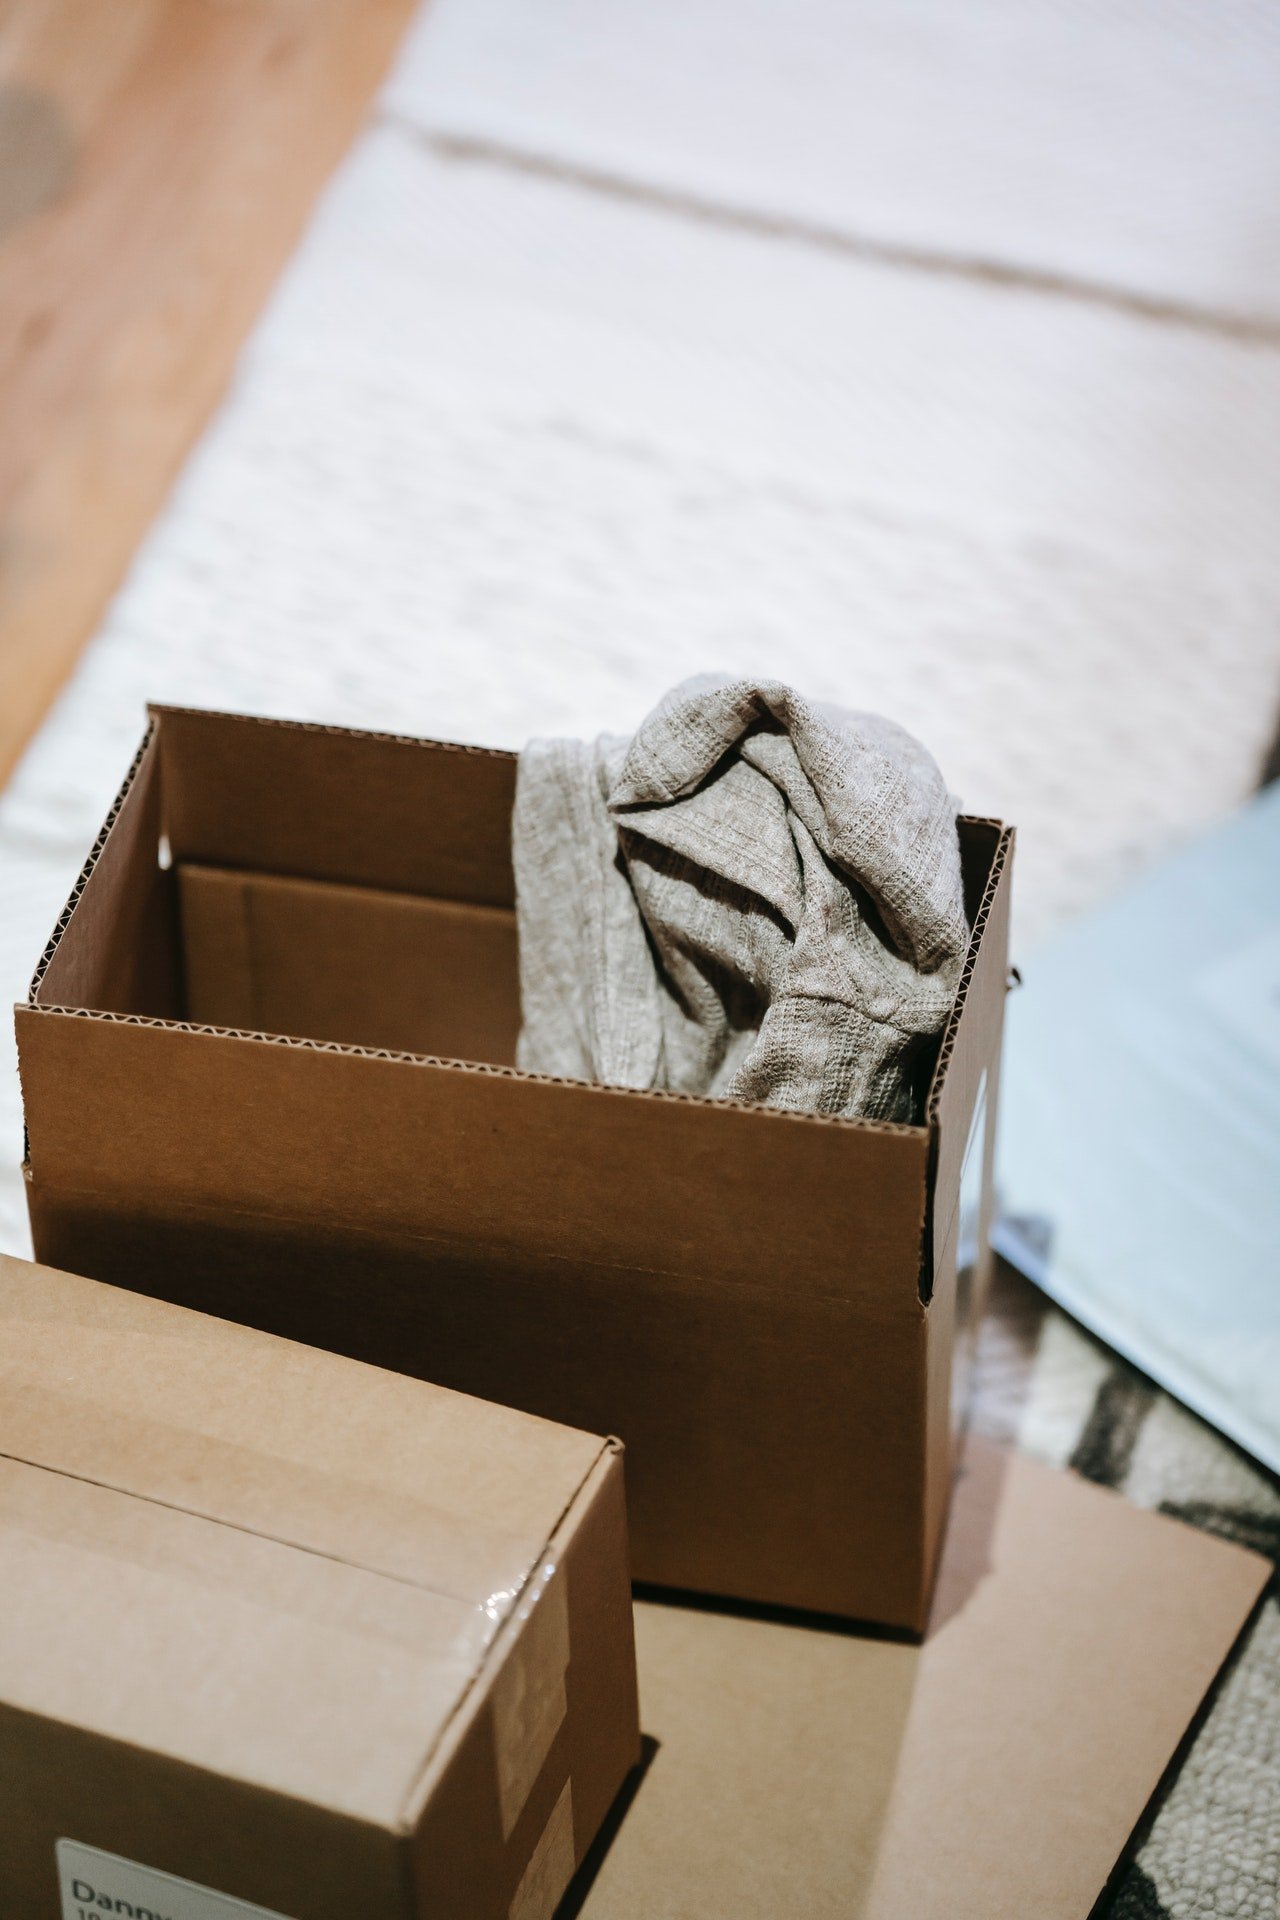 Arnold grabbed a box and a blanket from his house so the dog would be warm. | Source: Pexels